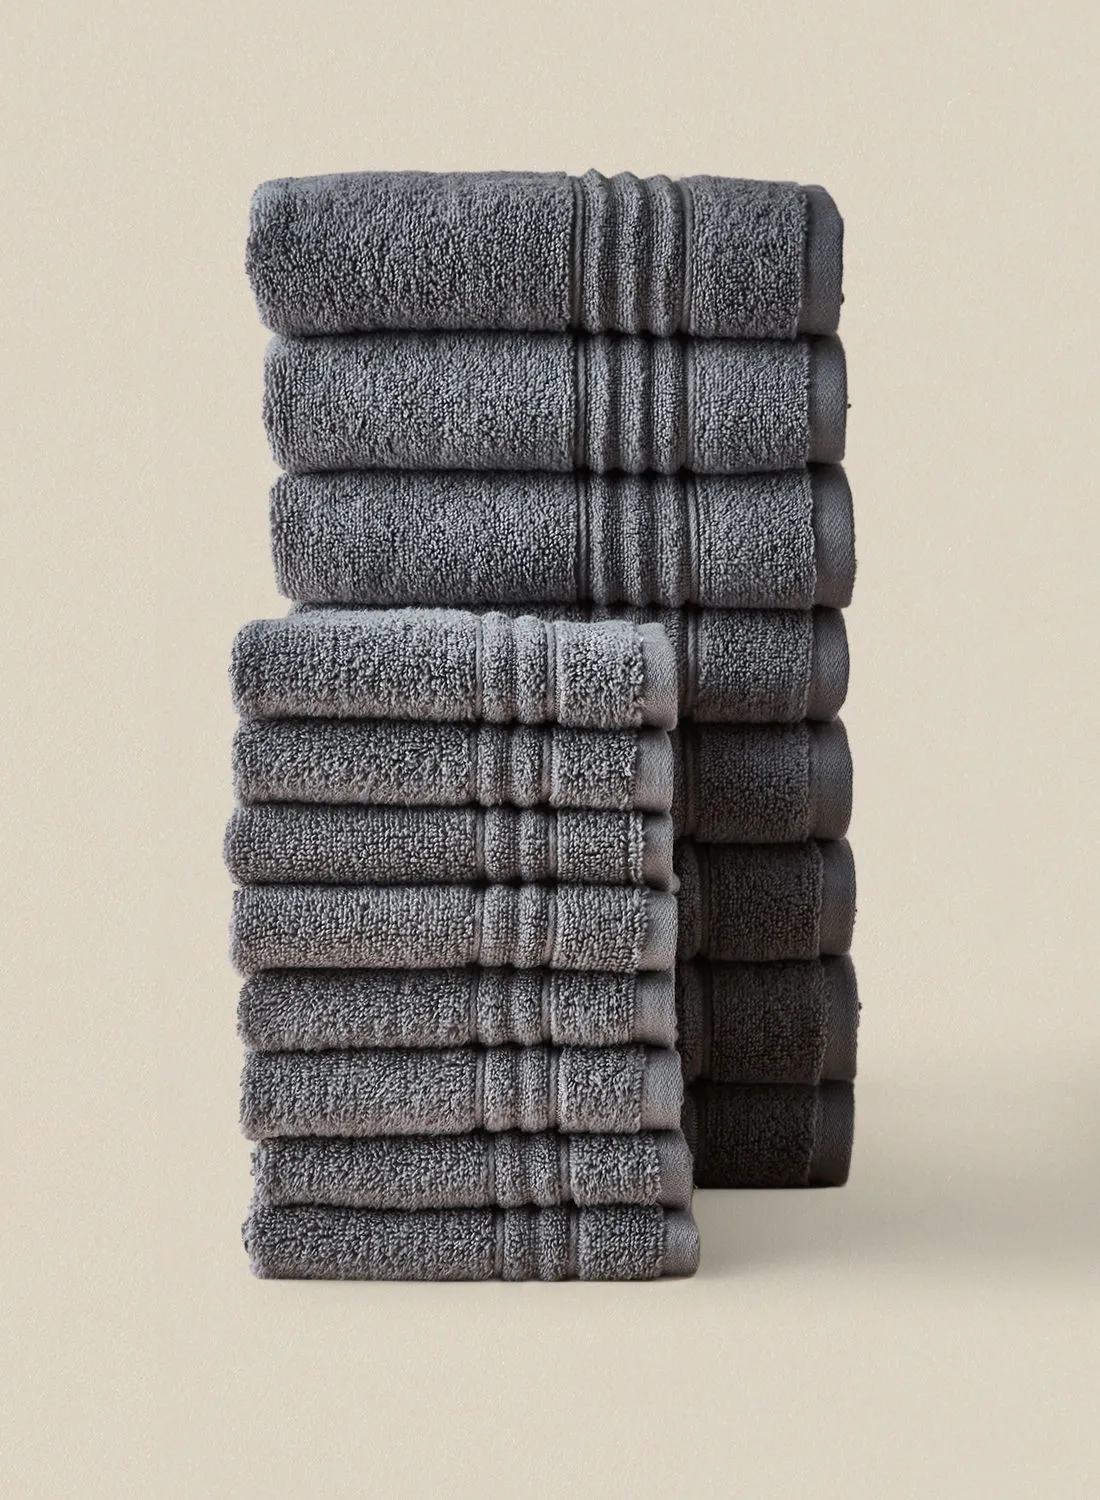 noon east 12 Piece Bathroom Towel Set - 500 GSM 100% Cotton - 4 Hand Towel - 6 Face Towel - 2 Bath Towel - Grey Color - Highly Absorbent - Fast Dry